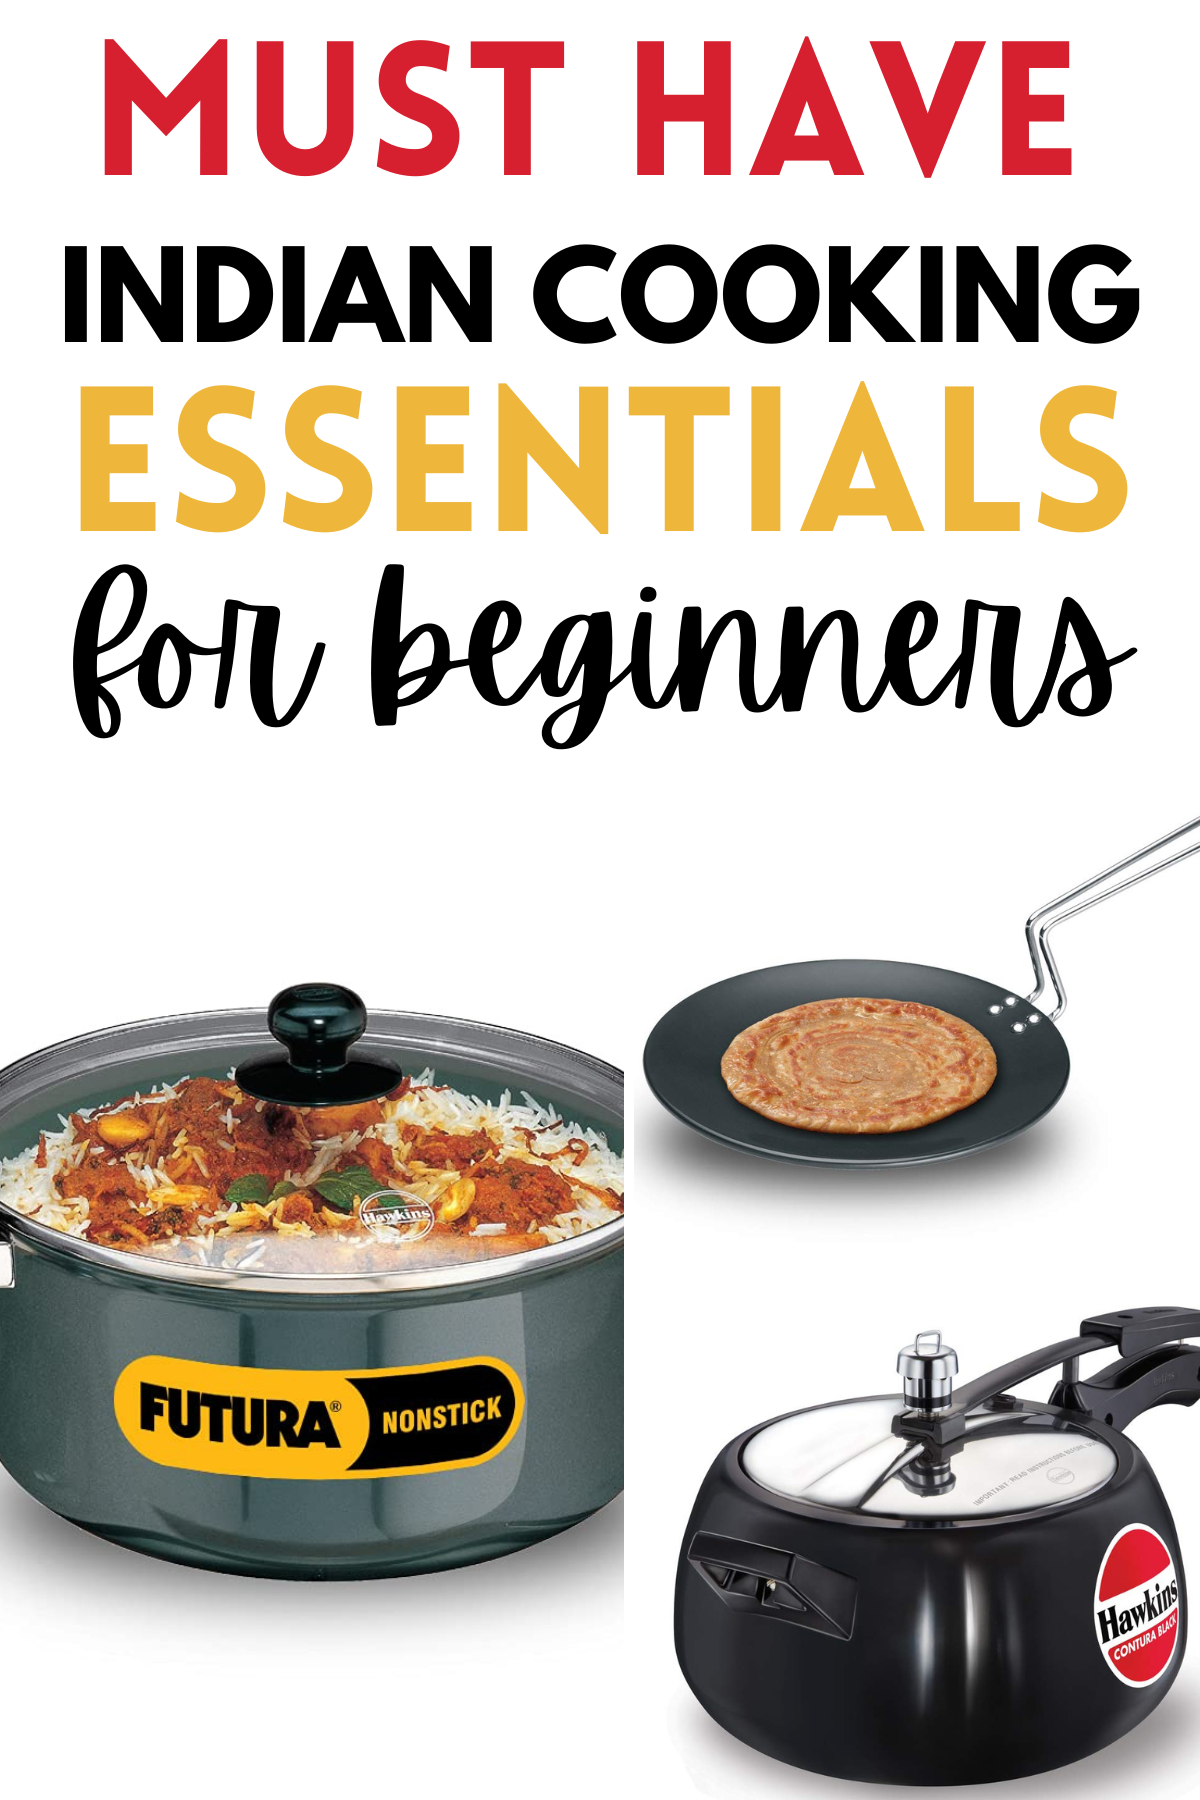 list of essential Indian cooking equipment.